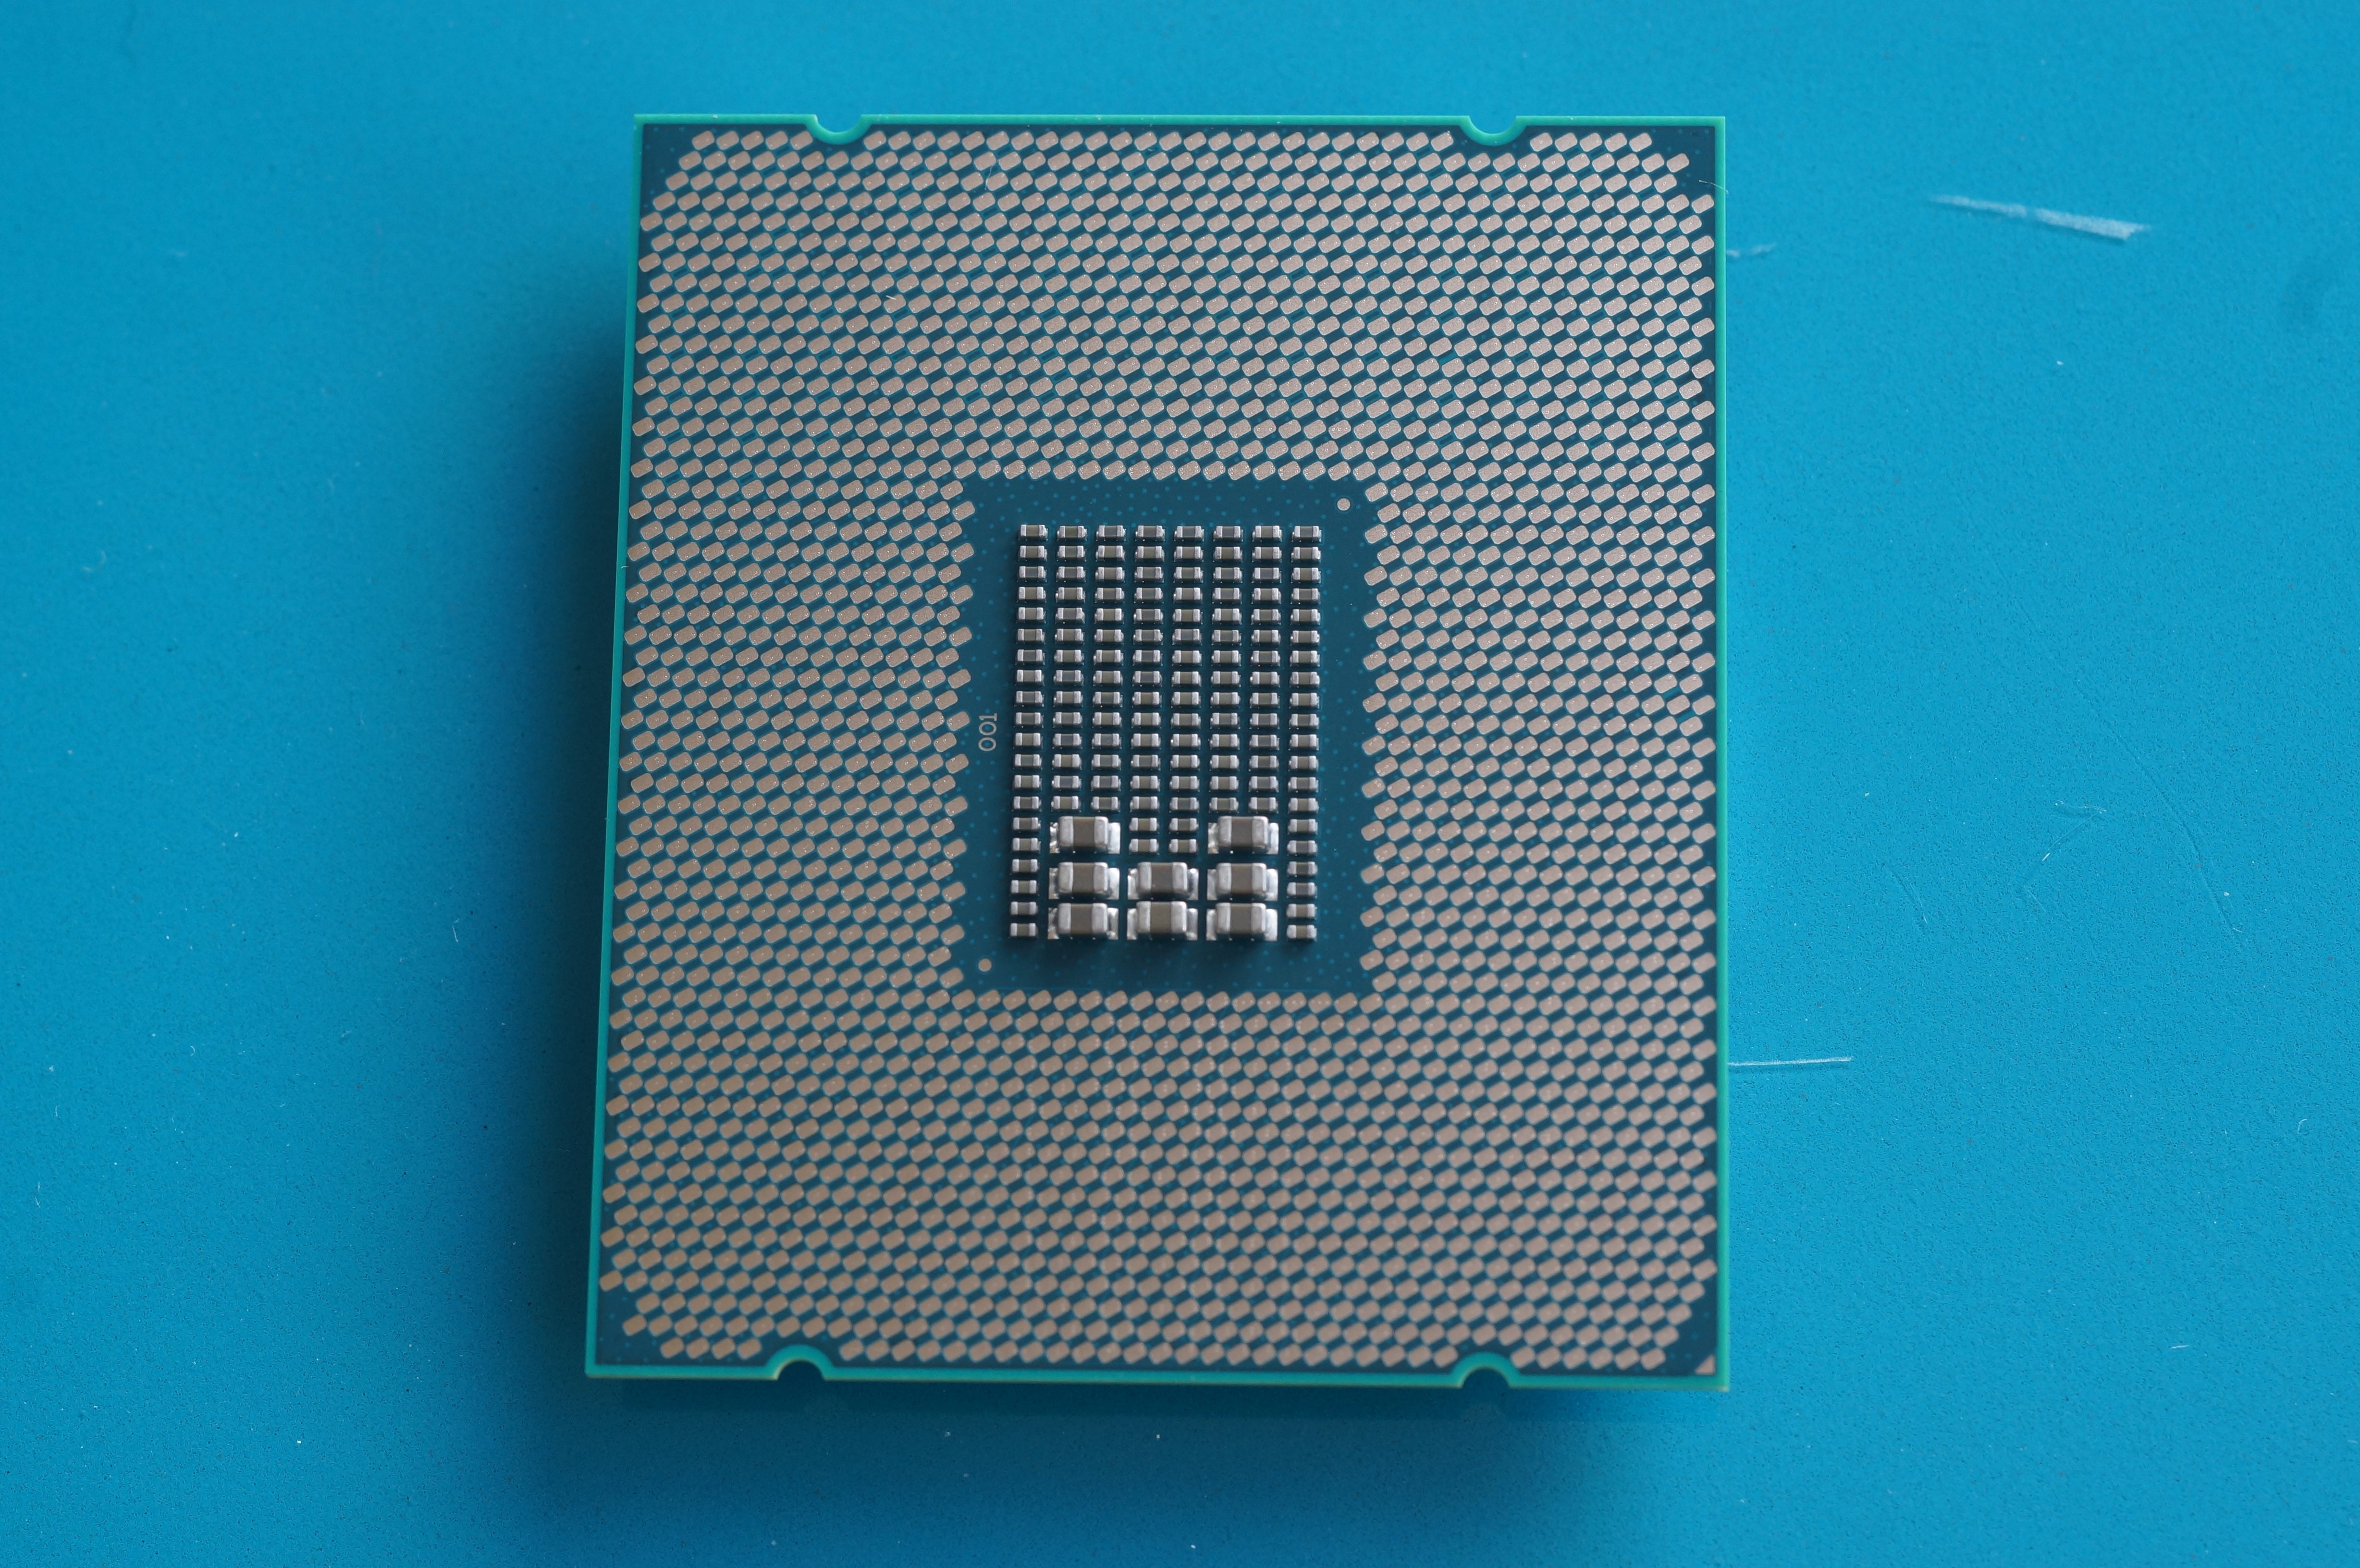 Intel Broadwell-E Core i7-6950X Review: The first 10-core enthusiast